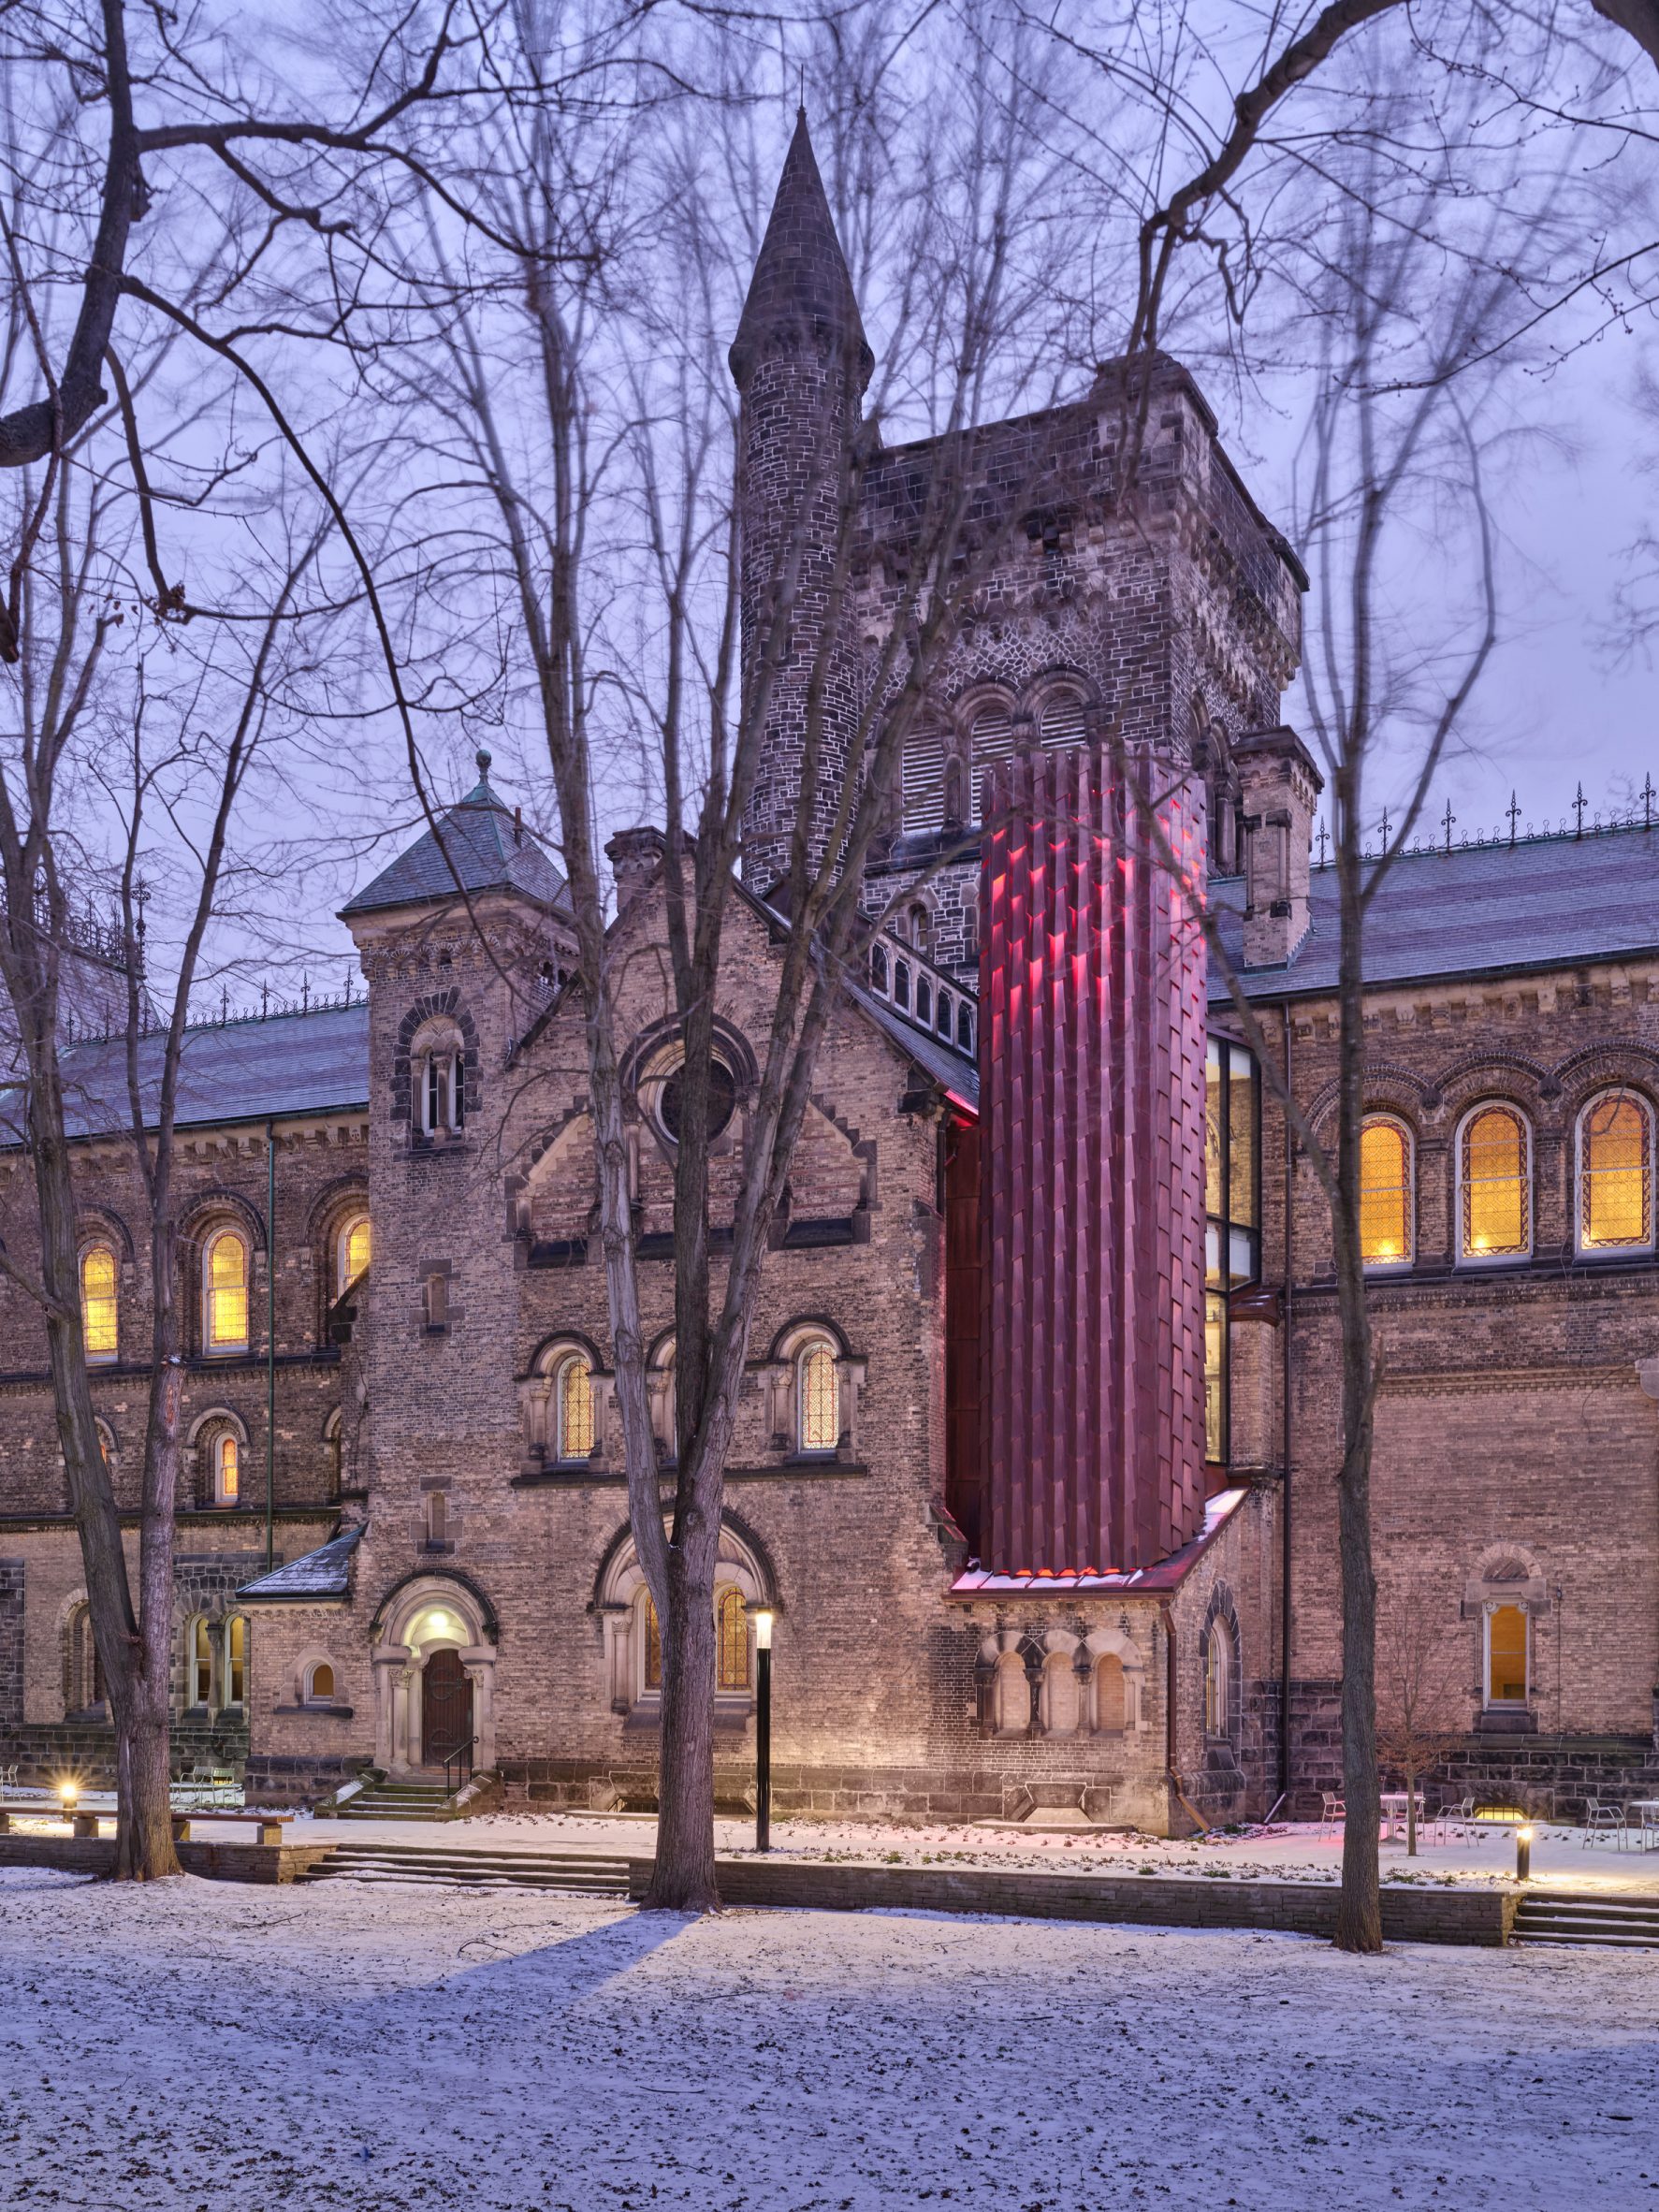 Contemporary elevator added to gothic-style building